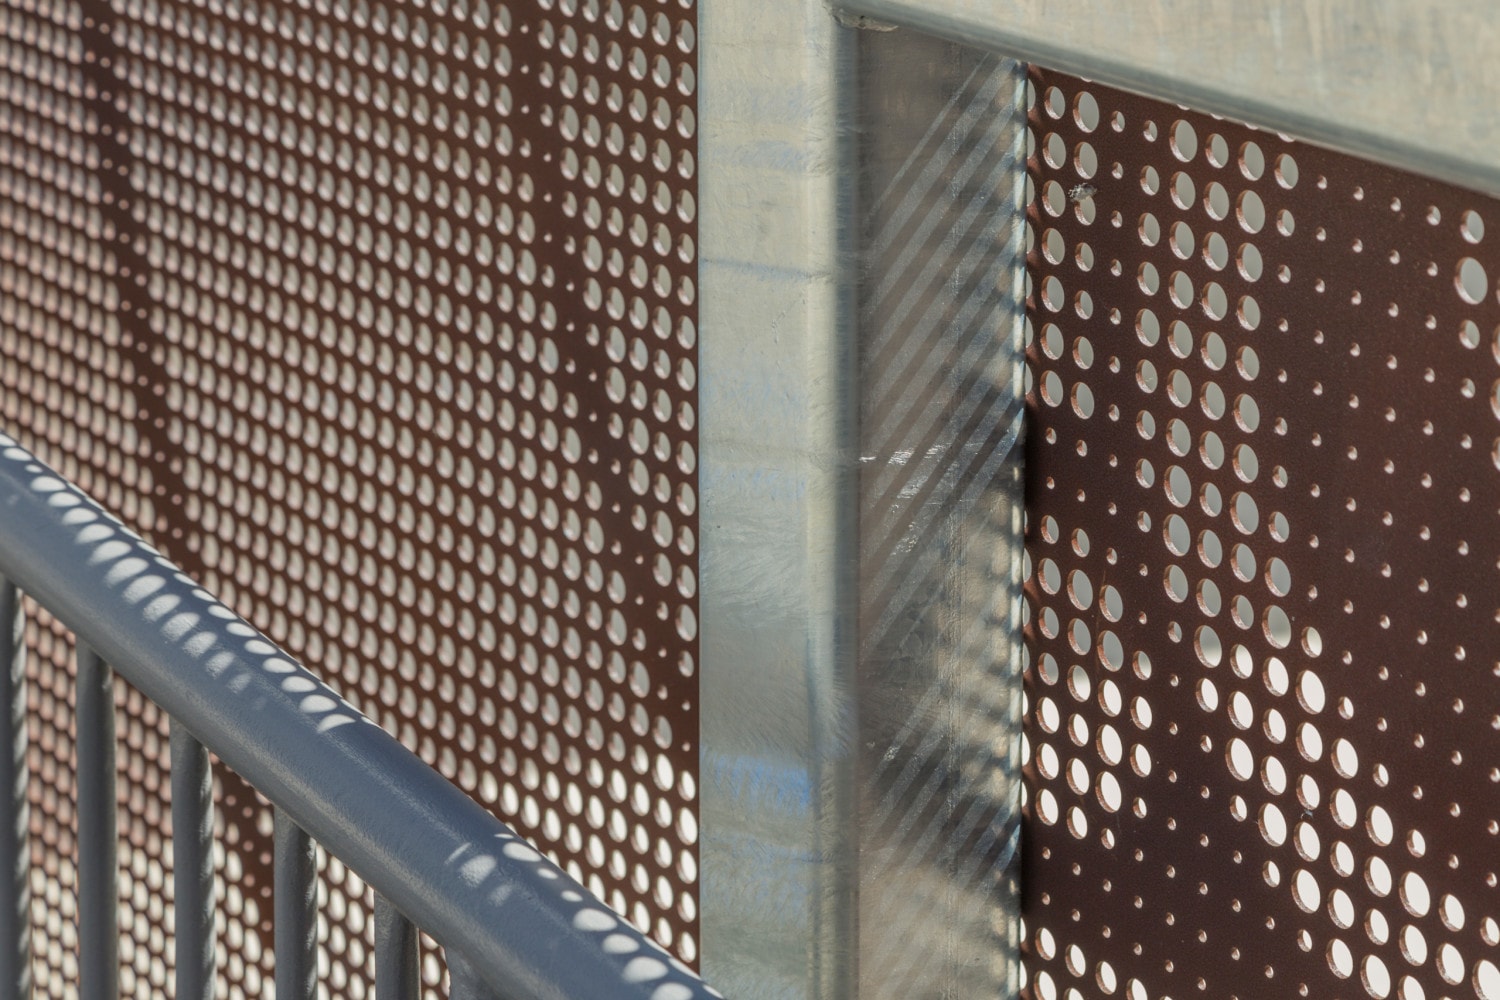 The contractor attached Zahner perforated panels to a galvanized steel structure.